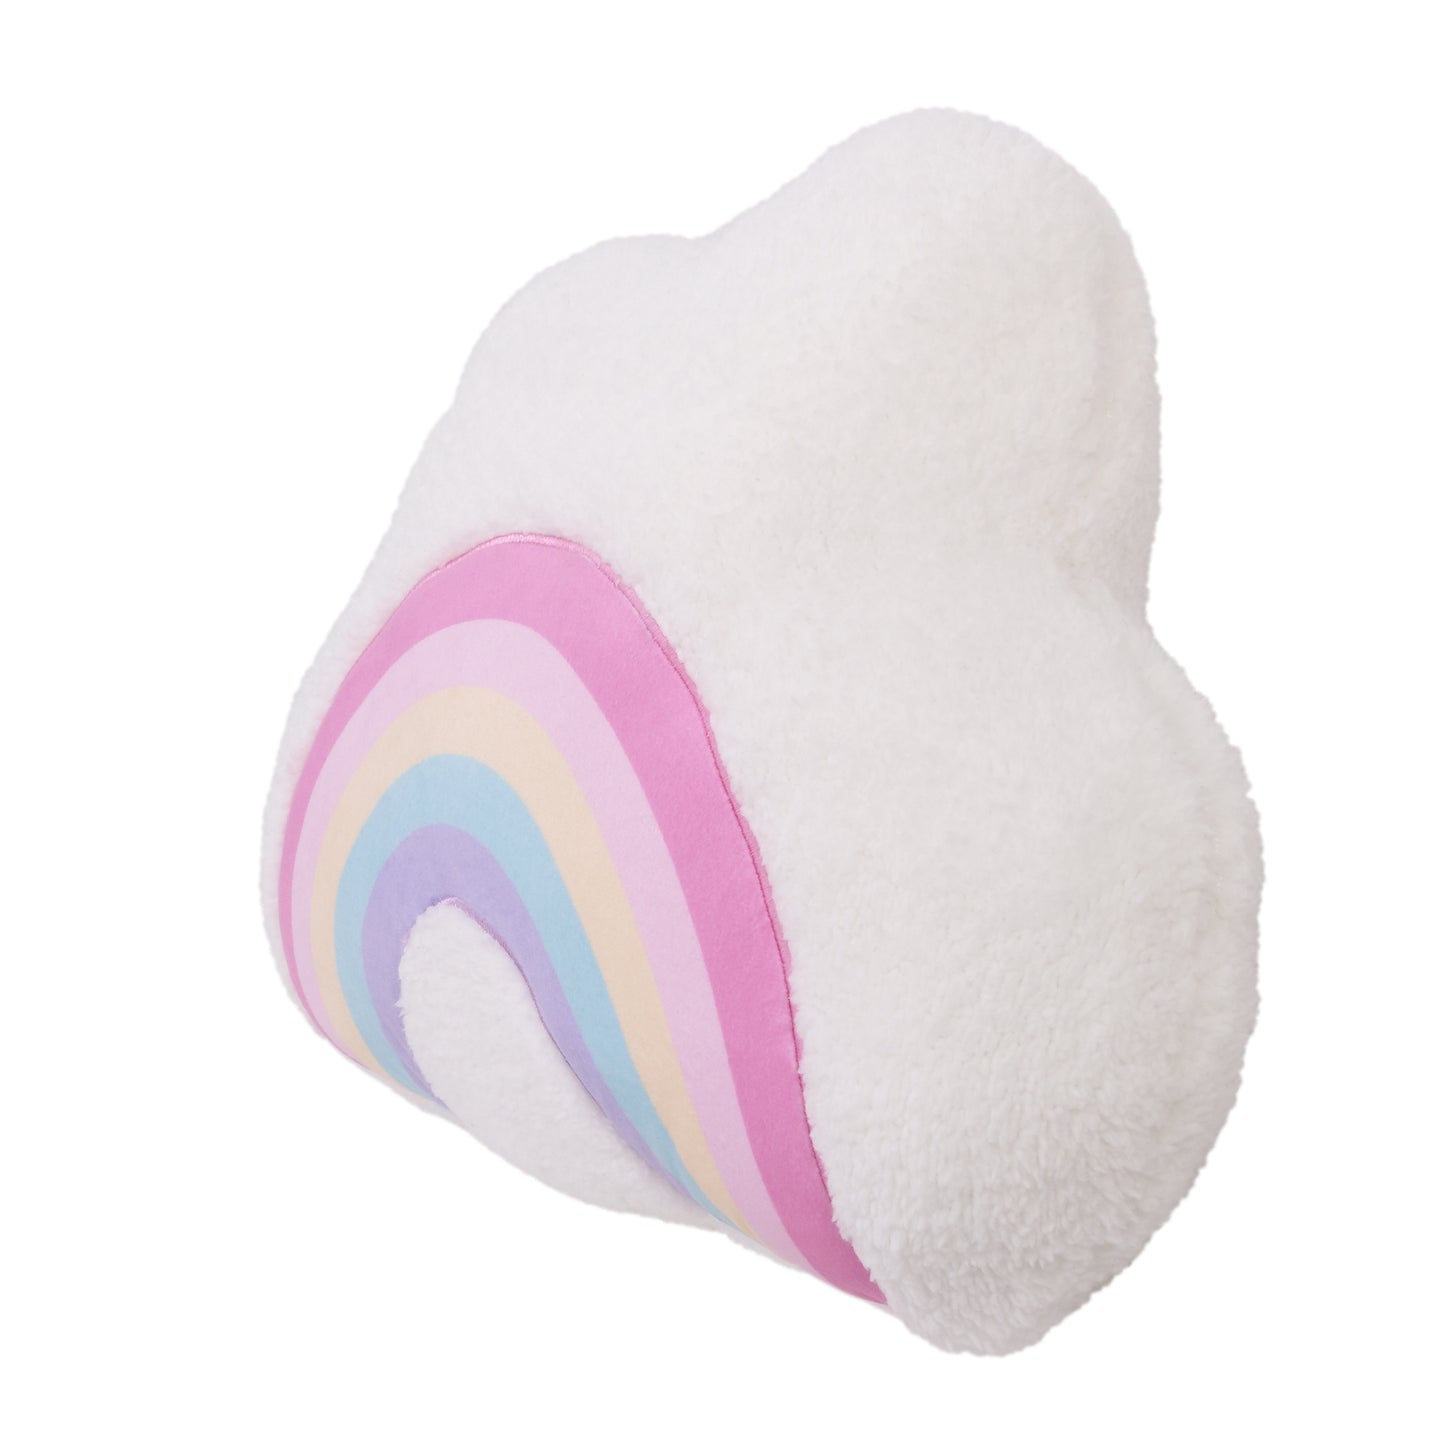 Little Love by NoJo White Cloud Pink, Yellow, Teal and Lavender Appliqued Rainbow Decorative Shaped Pillow